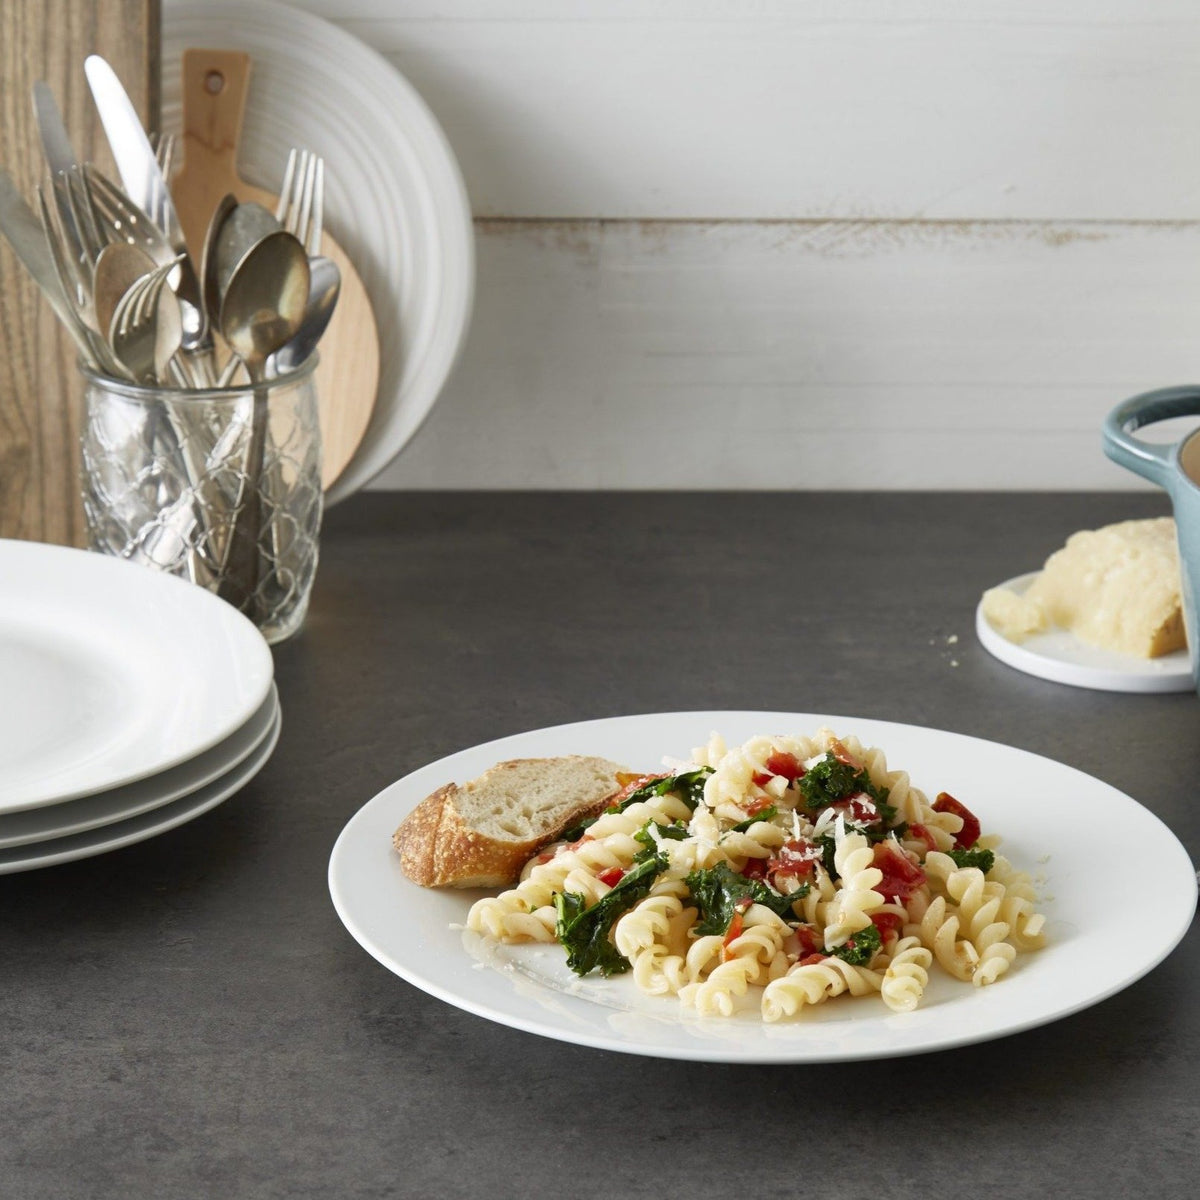 Lifestyle. Kitchen counter, with chef plating a gorgeous kale and tomato pasta dish on a white porcelain dinner plate.